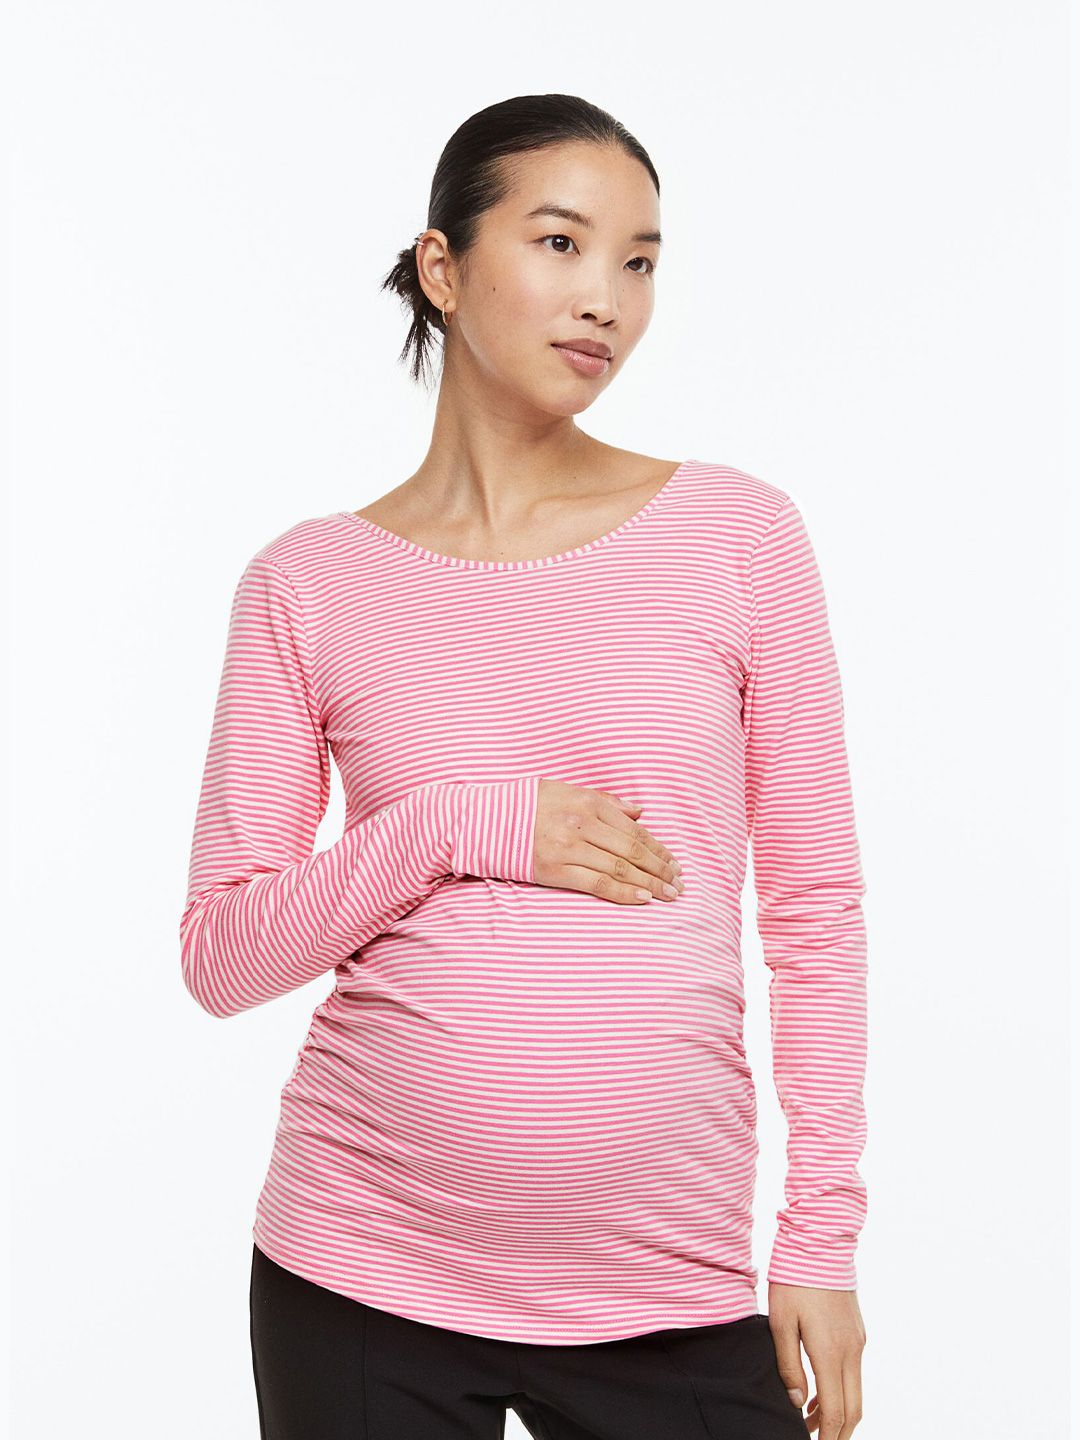 H&M MAMA Cotton Jersey Top Price in India